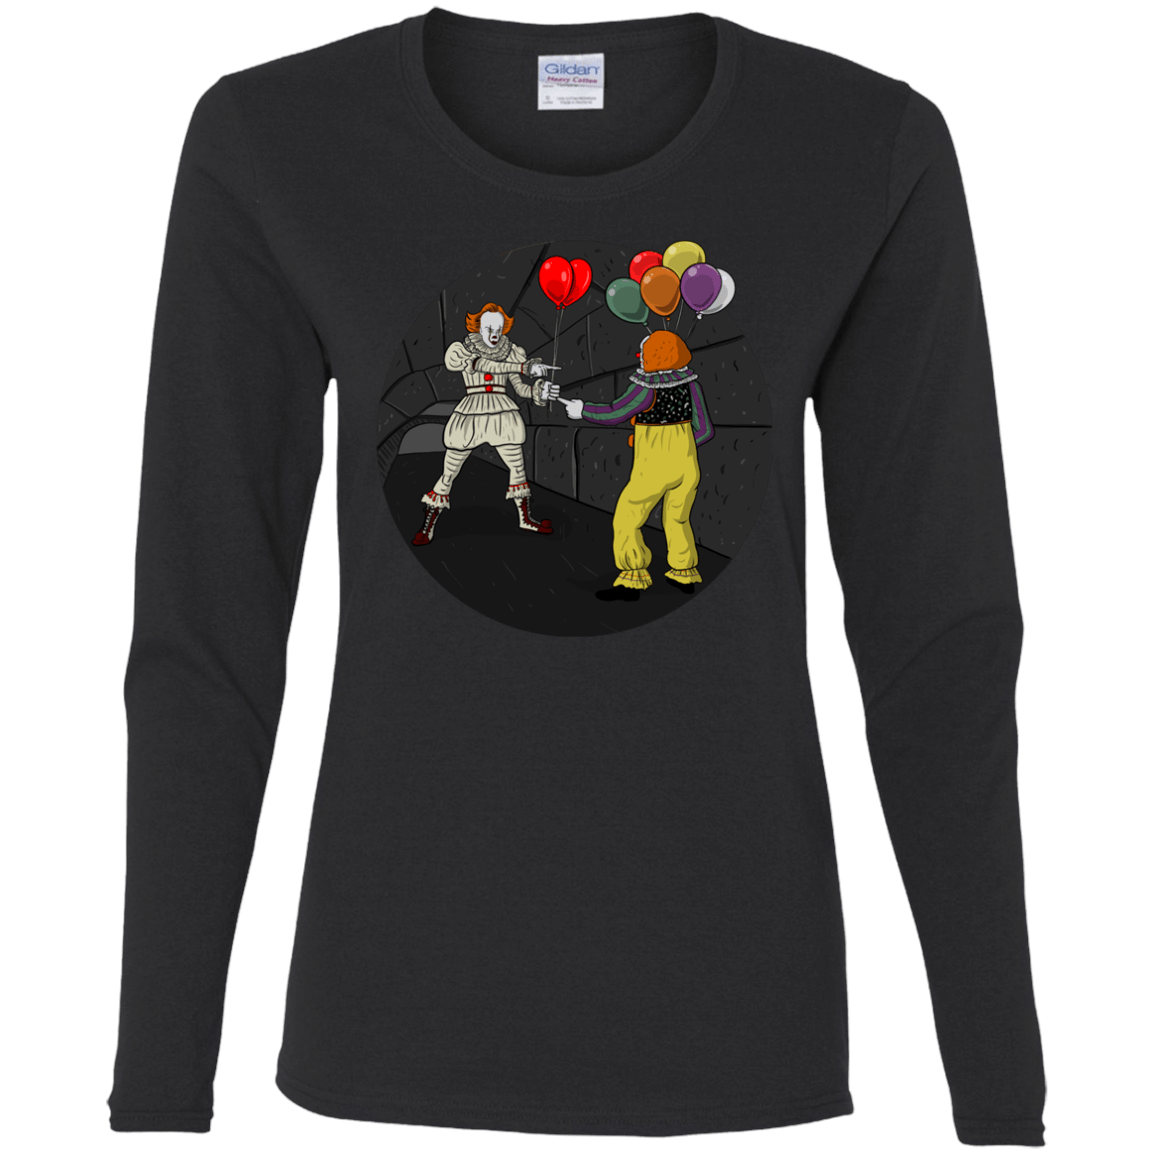 T-Shirts Black / S 2 Pennywise Women's Long Sleeve T-Shirt